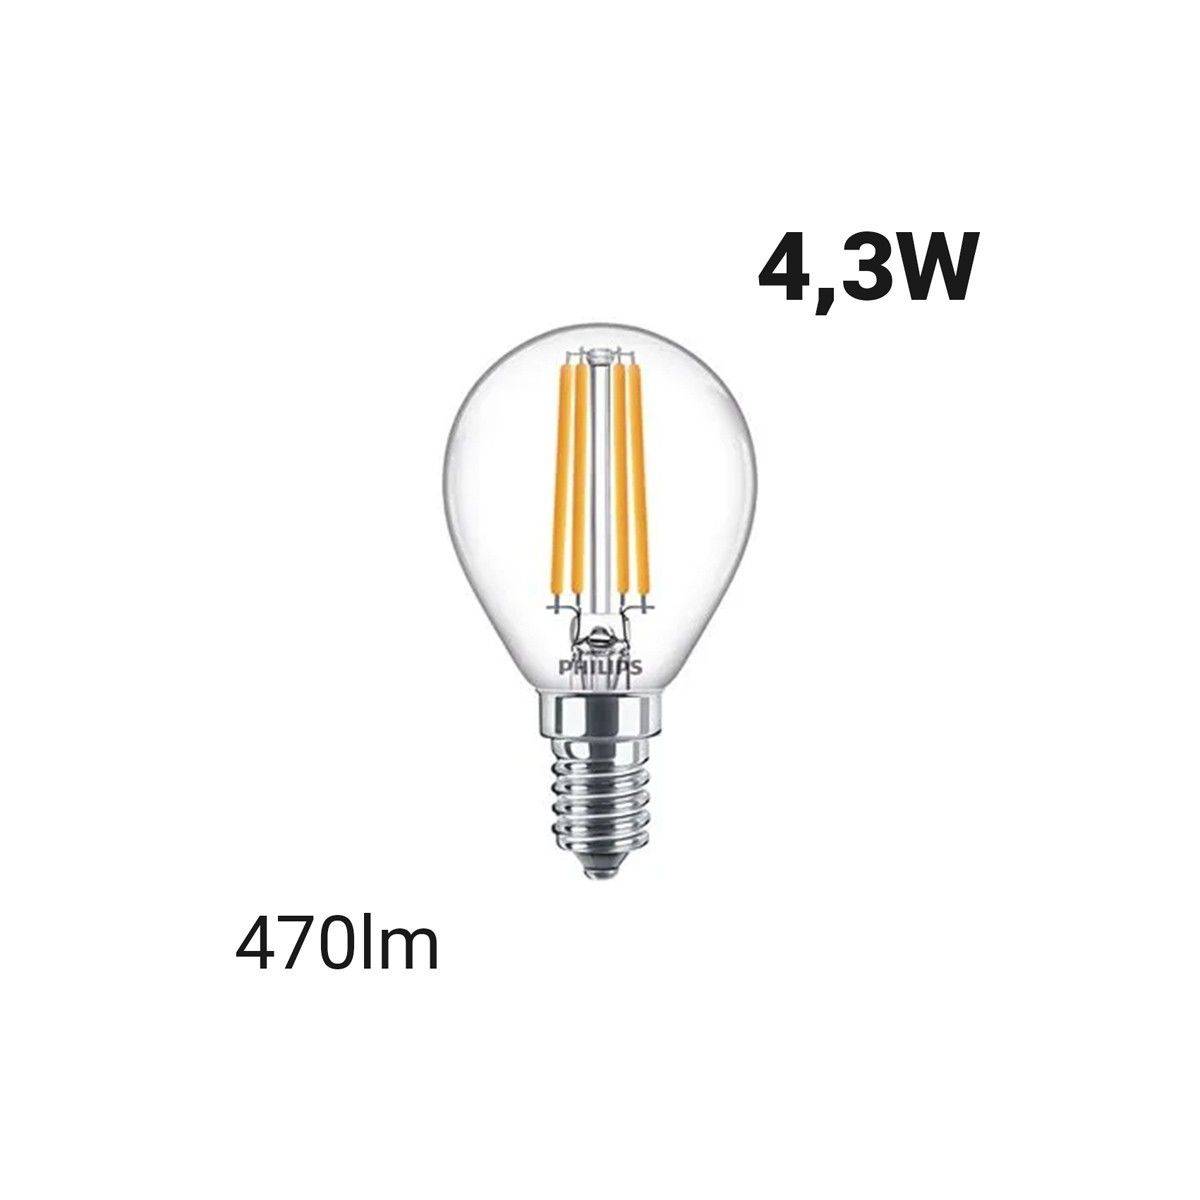 This problem is solved by the new Philips Hue E14 Luster 